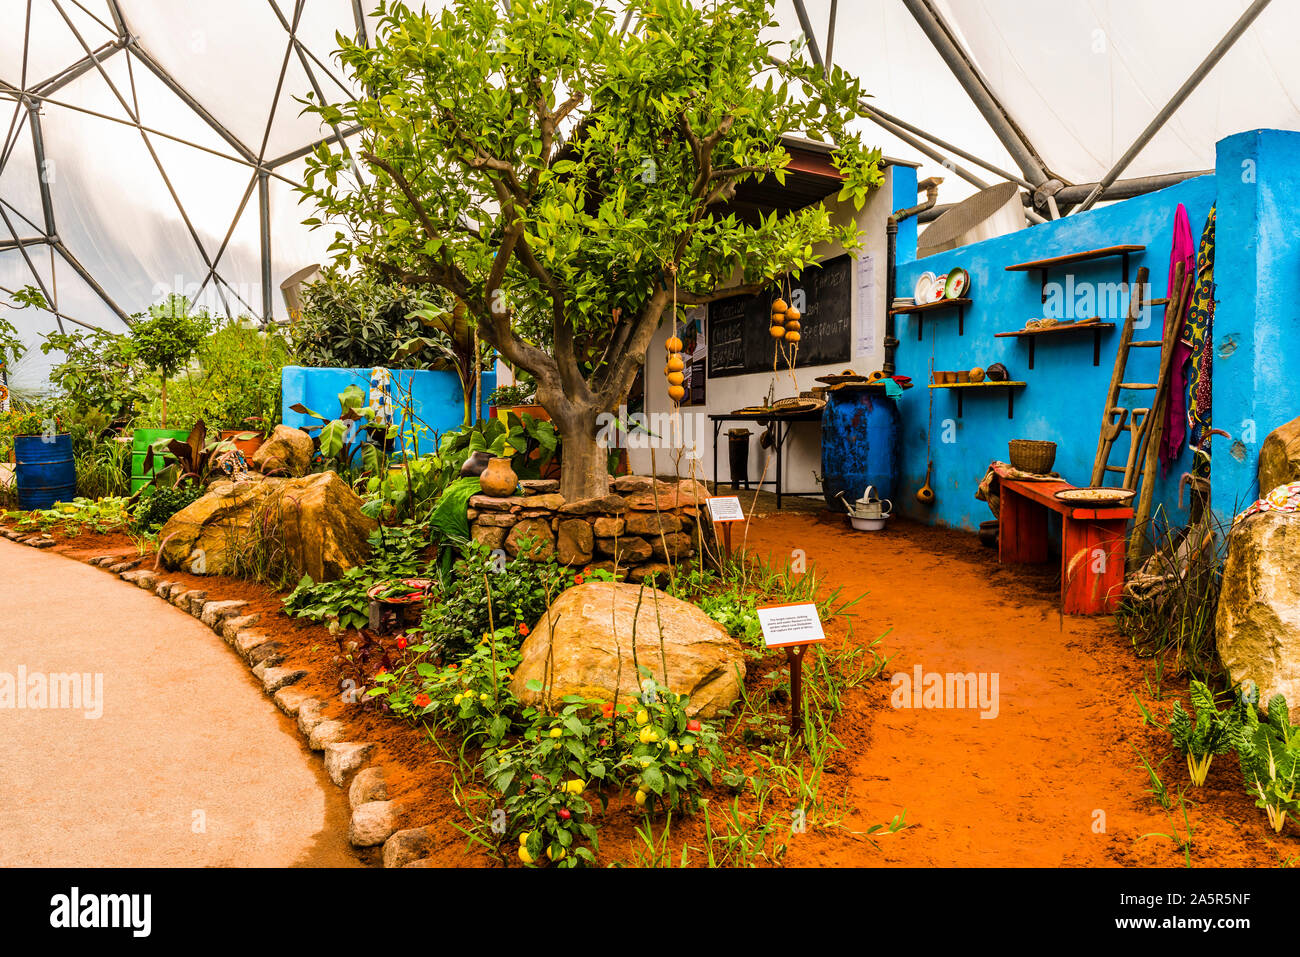 The gold medal winning RHS Chelsea Flower Show 2019 CAMFED Garden re-built at the Eden Project, Cornwall, UK Stock Photo